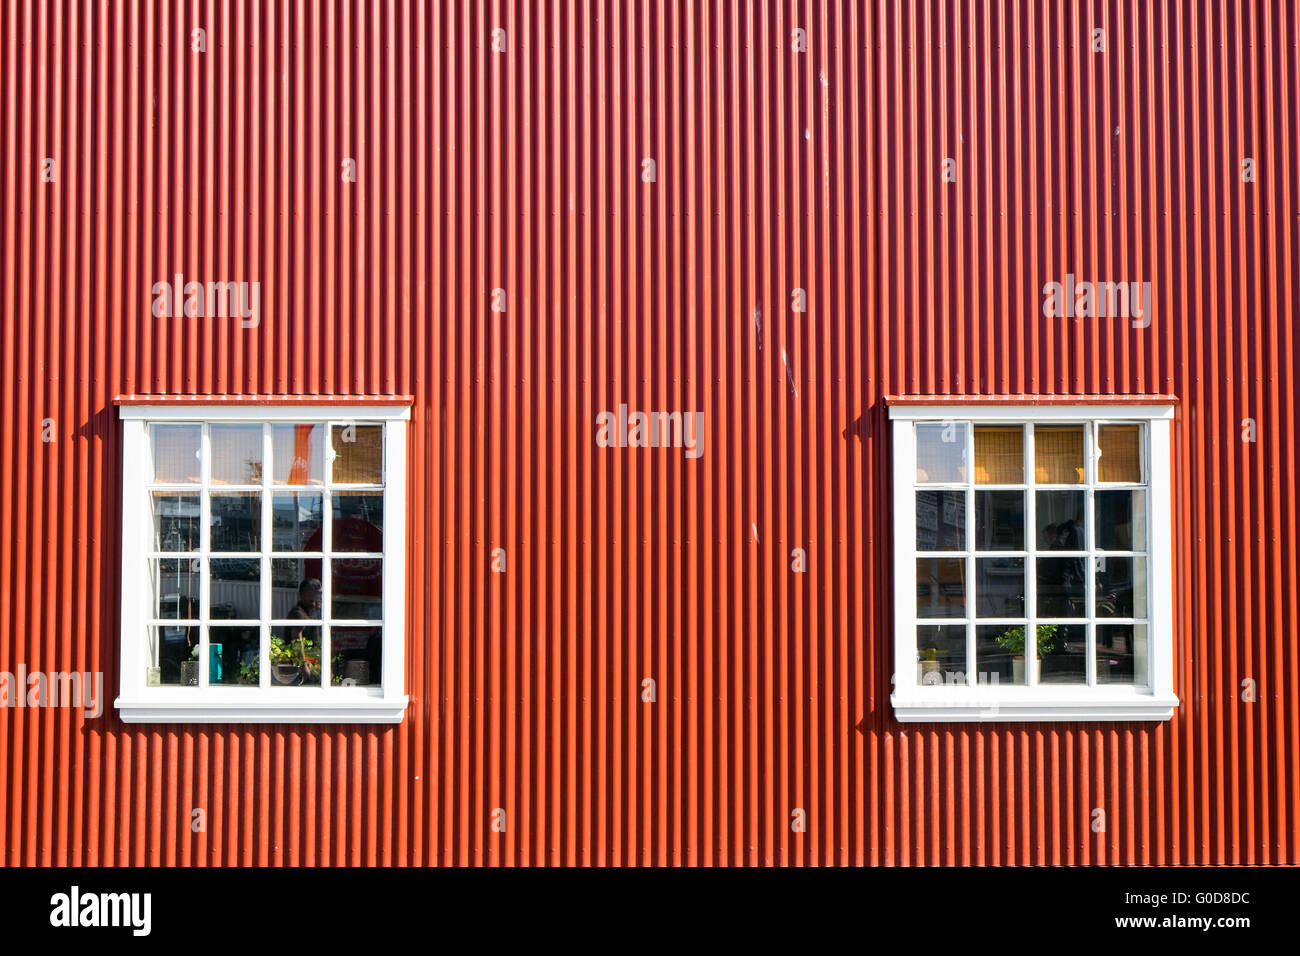 Red wall and two windows seen in Reykjavik, Iclean Stock Photo